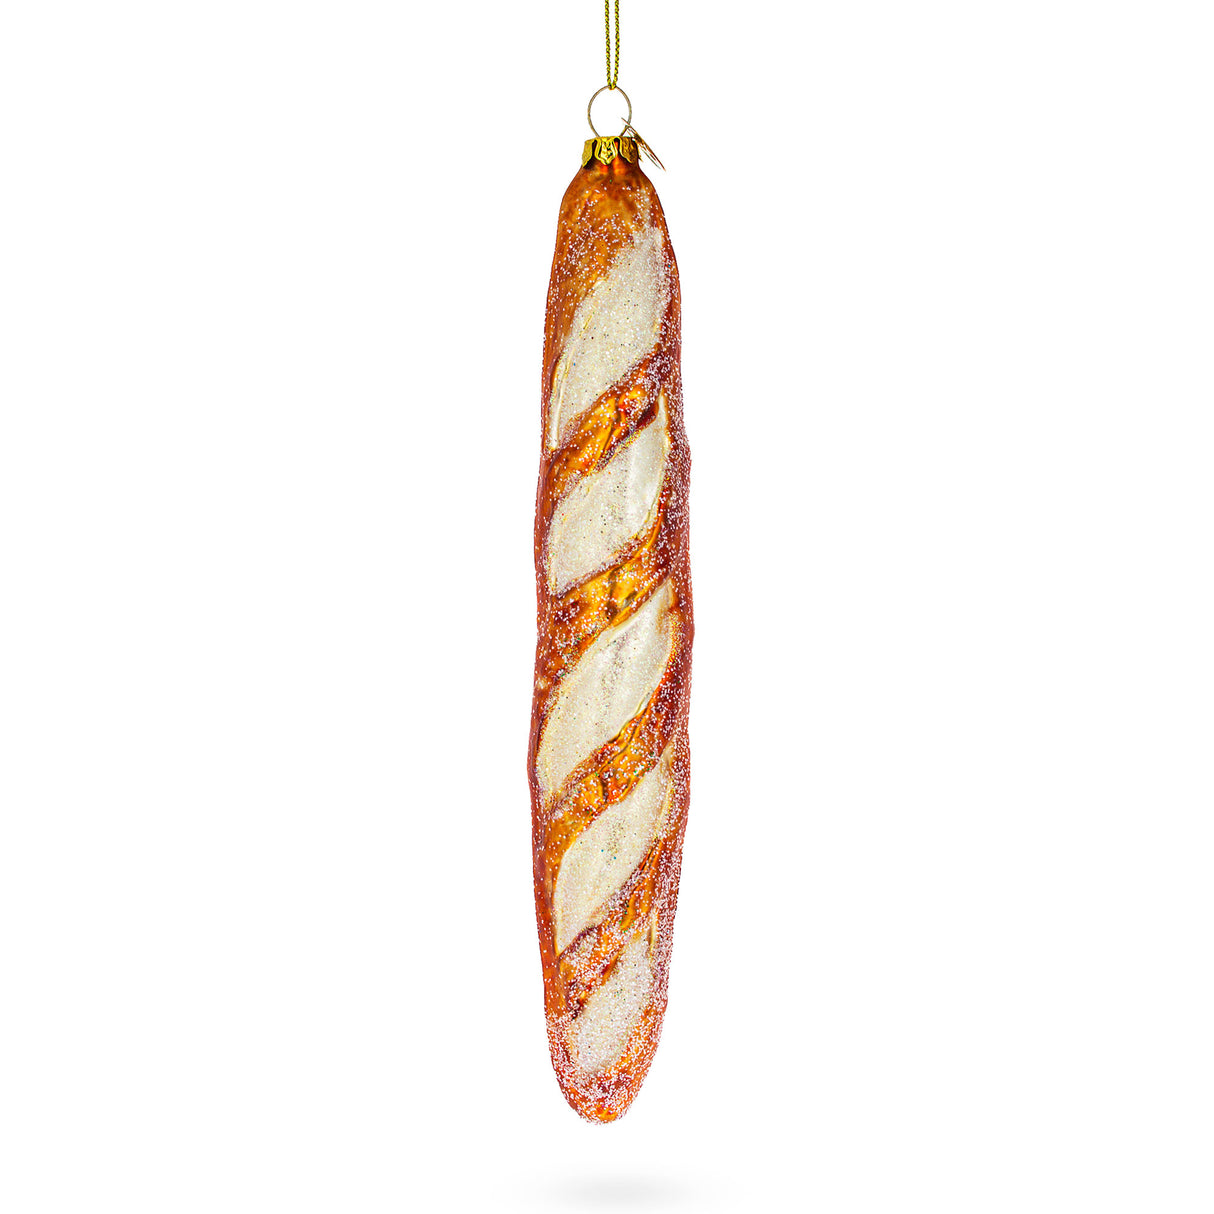 Crusty French Baguette Bread - Blown Glass Christmas Ornament in Brown color,  shape